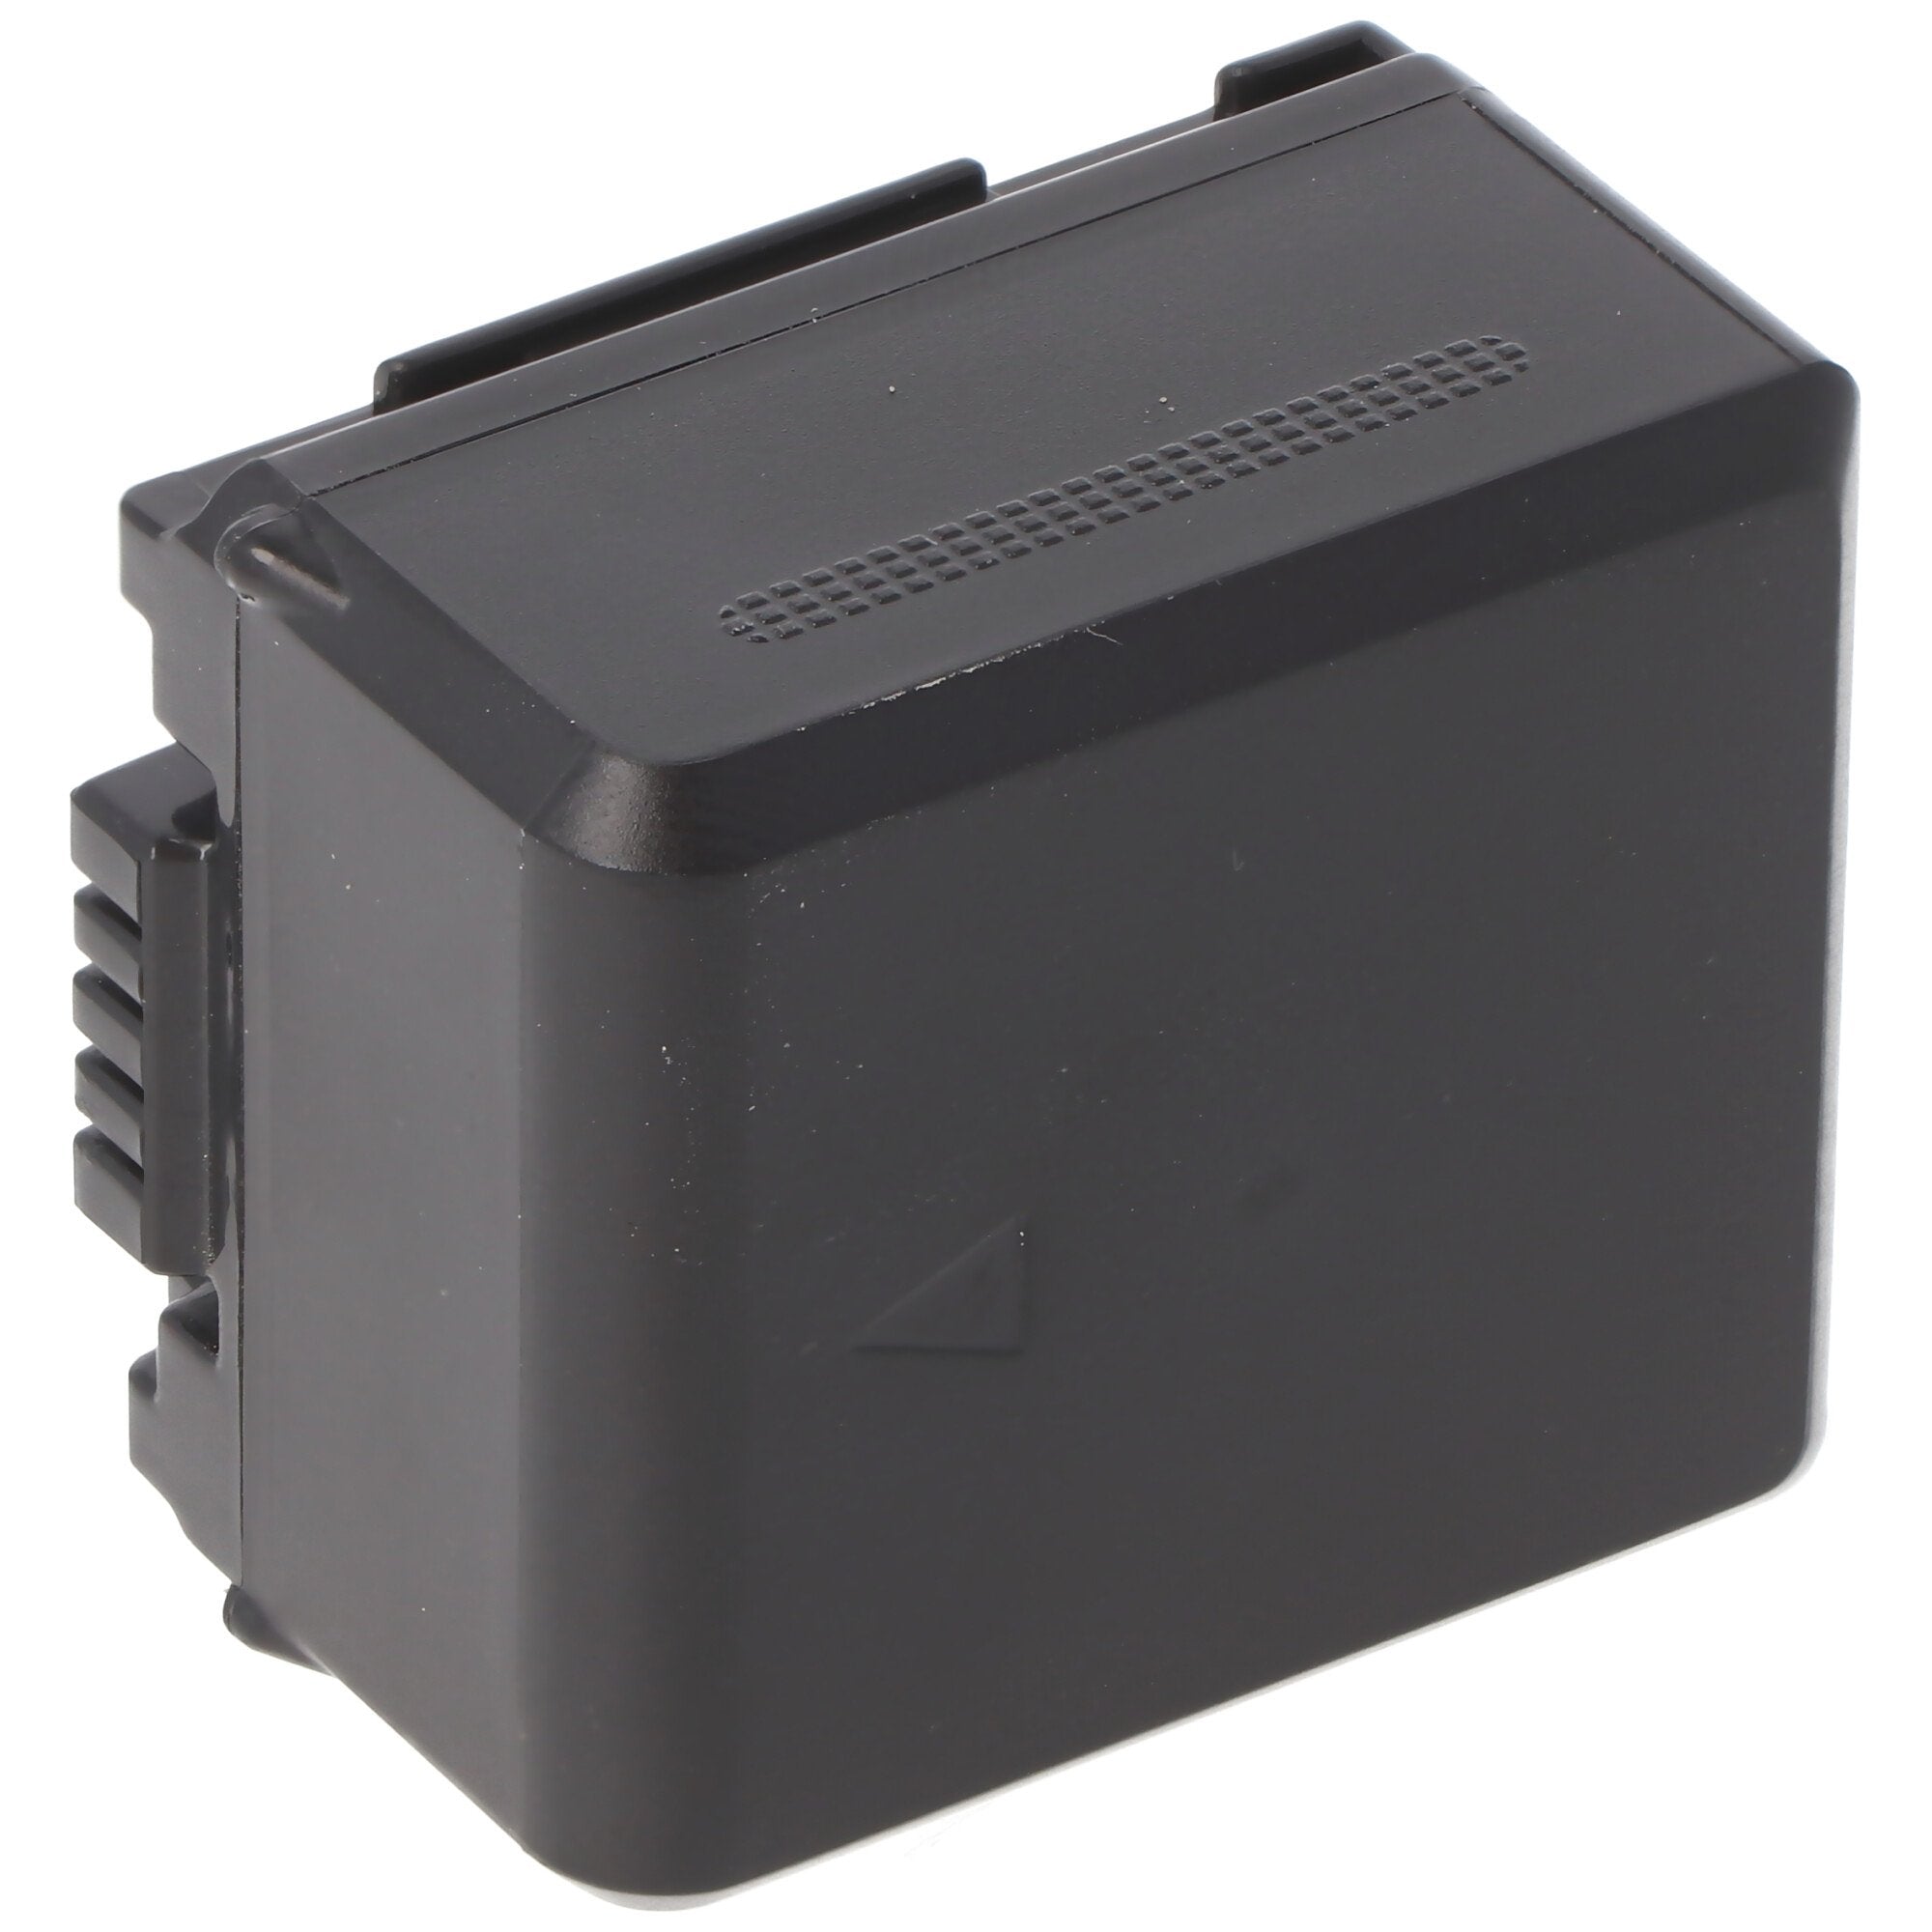 Battery suitable for Panasonic VW-VBG130 battery with current software